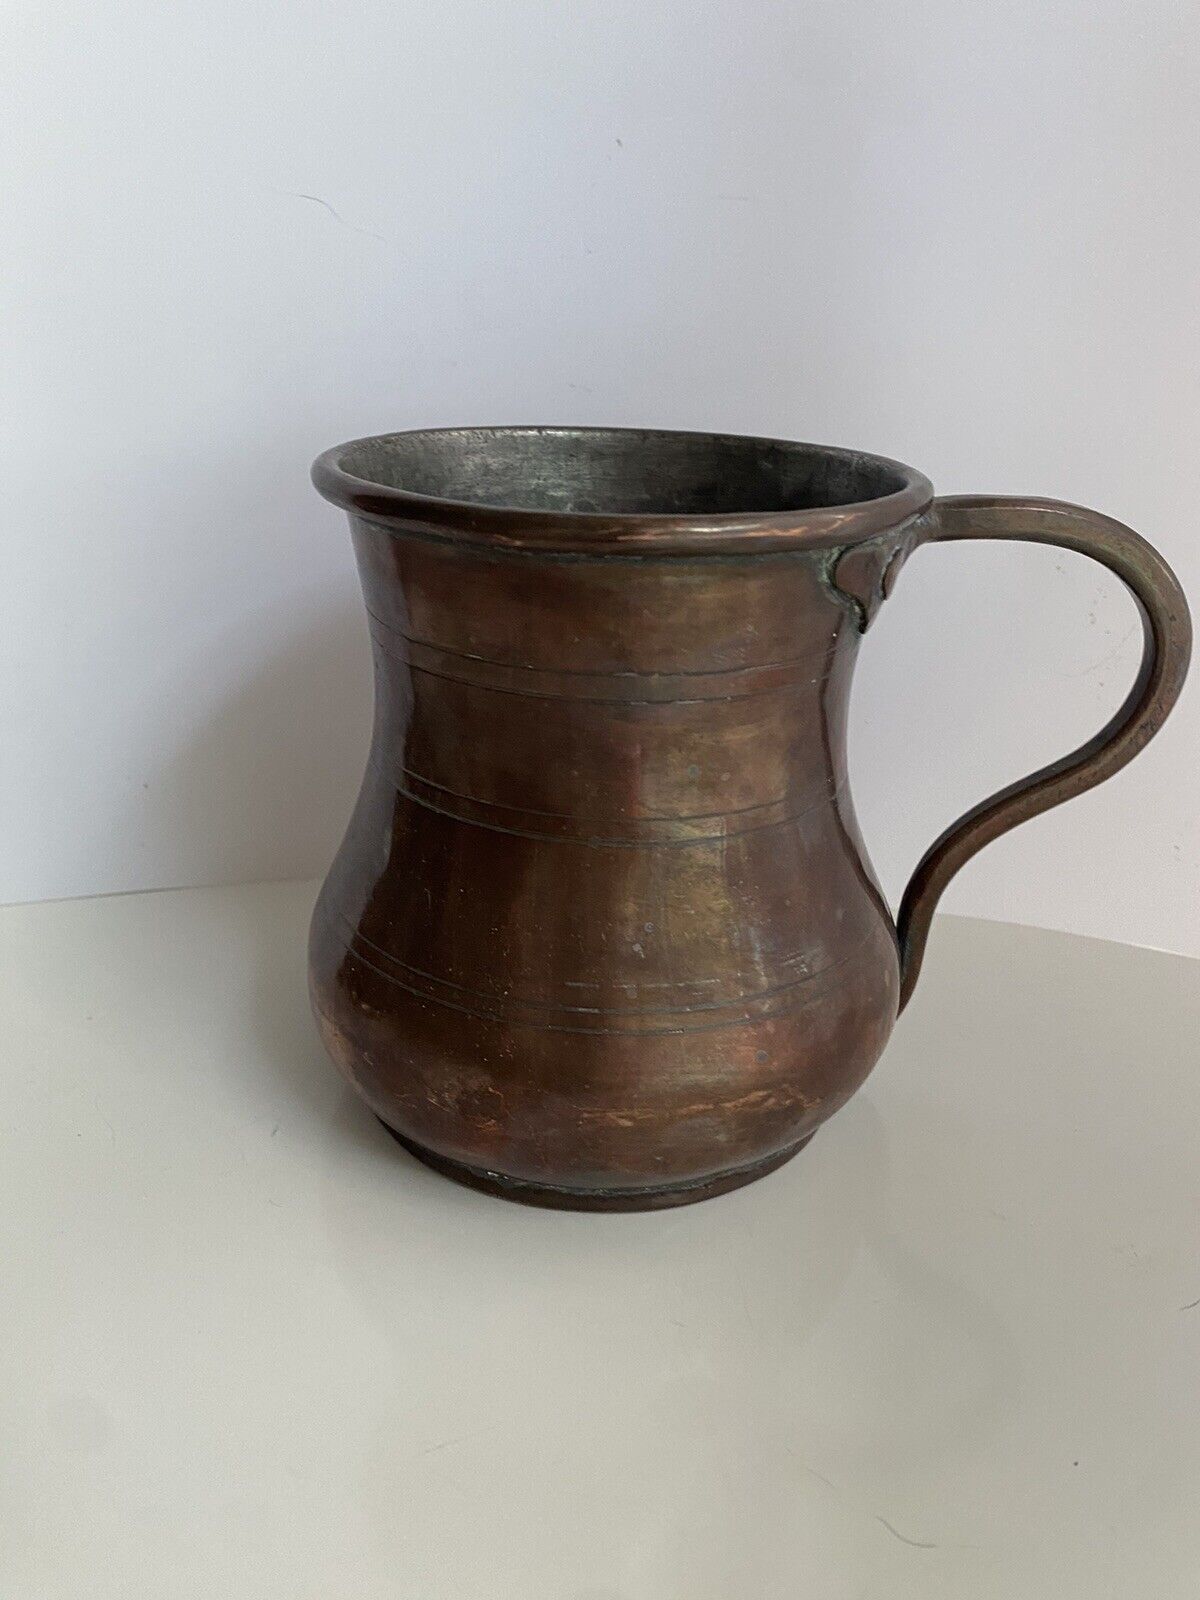 Antique Tinned Copper Mug - Hand Forged Hammered